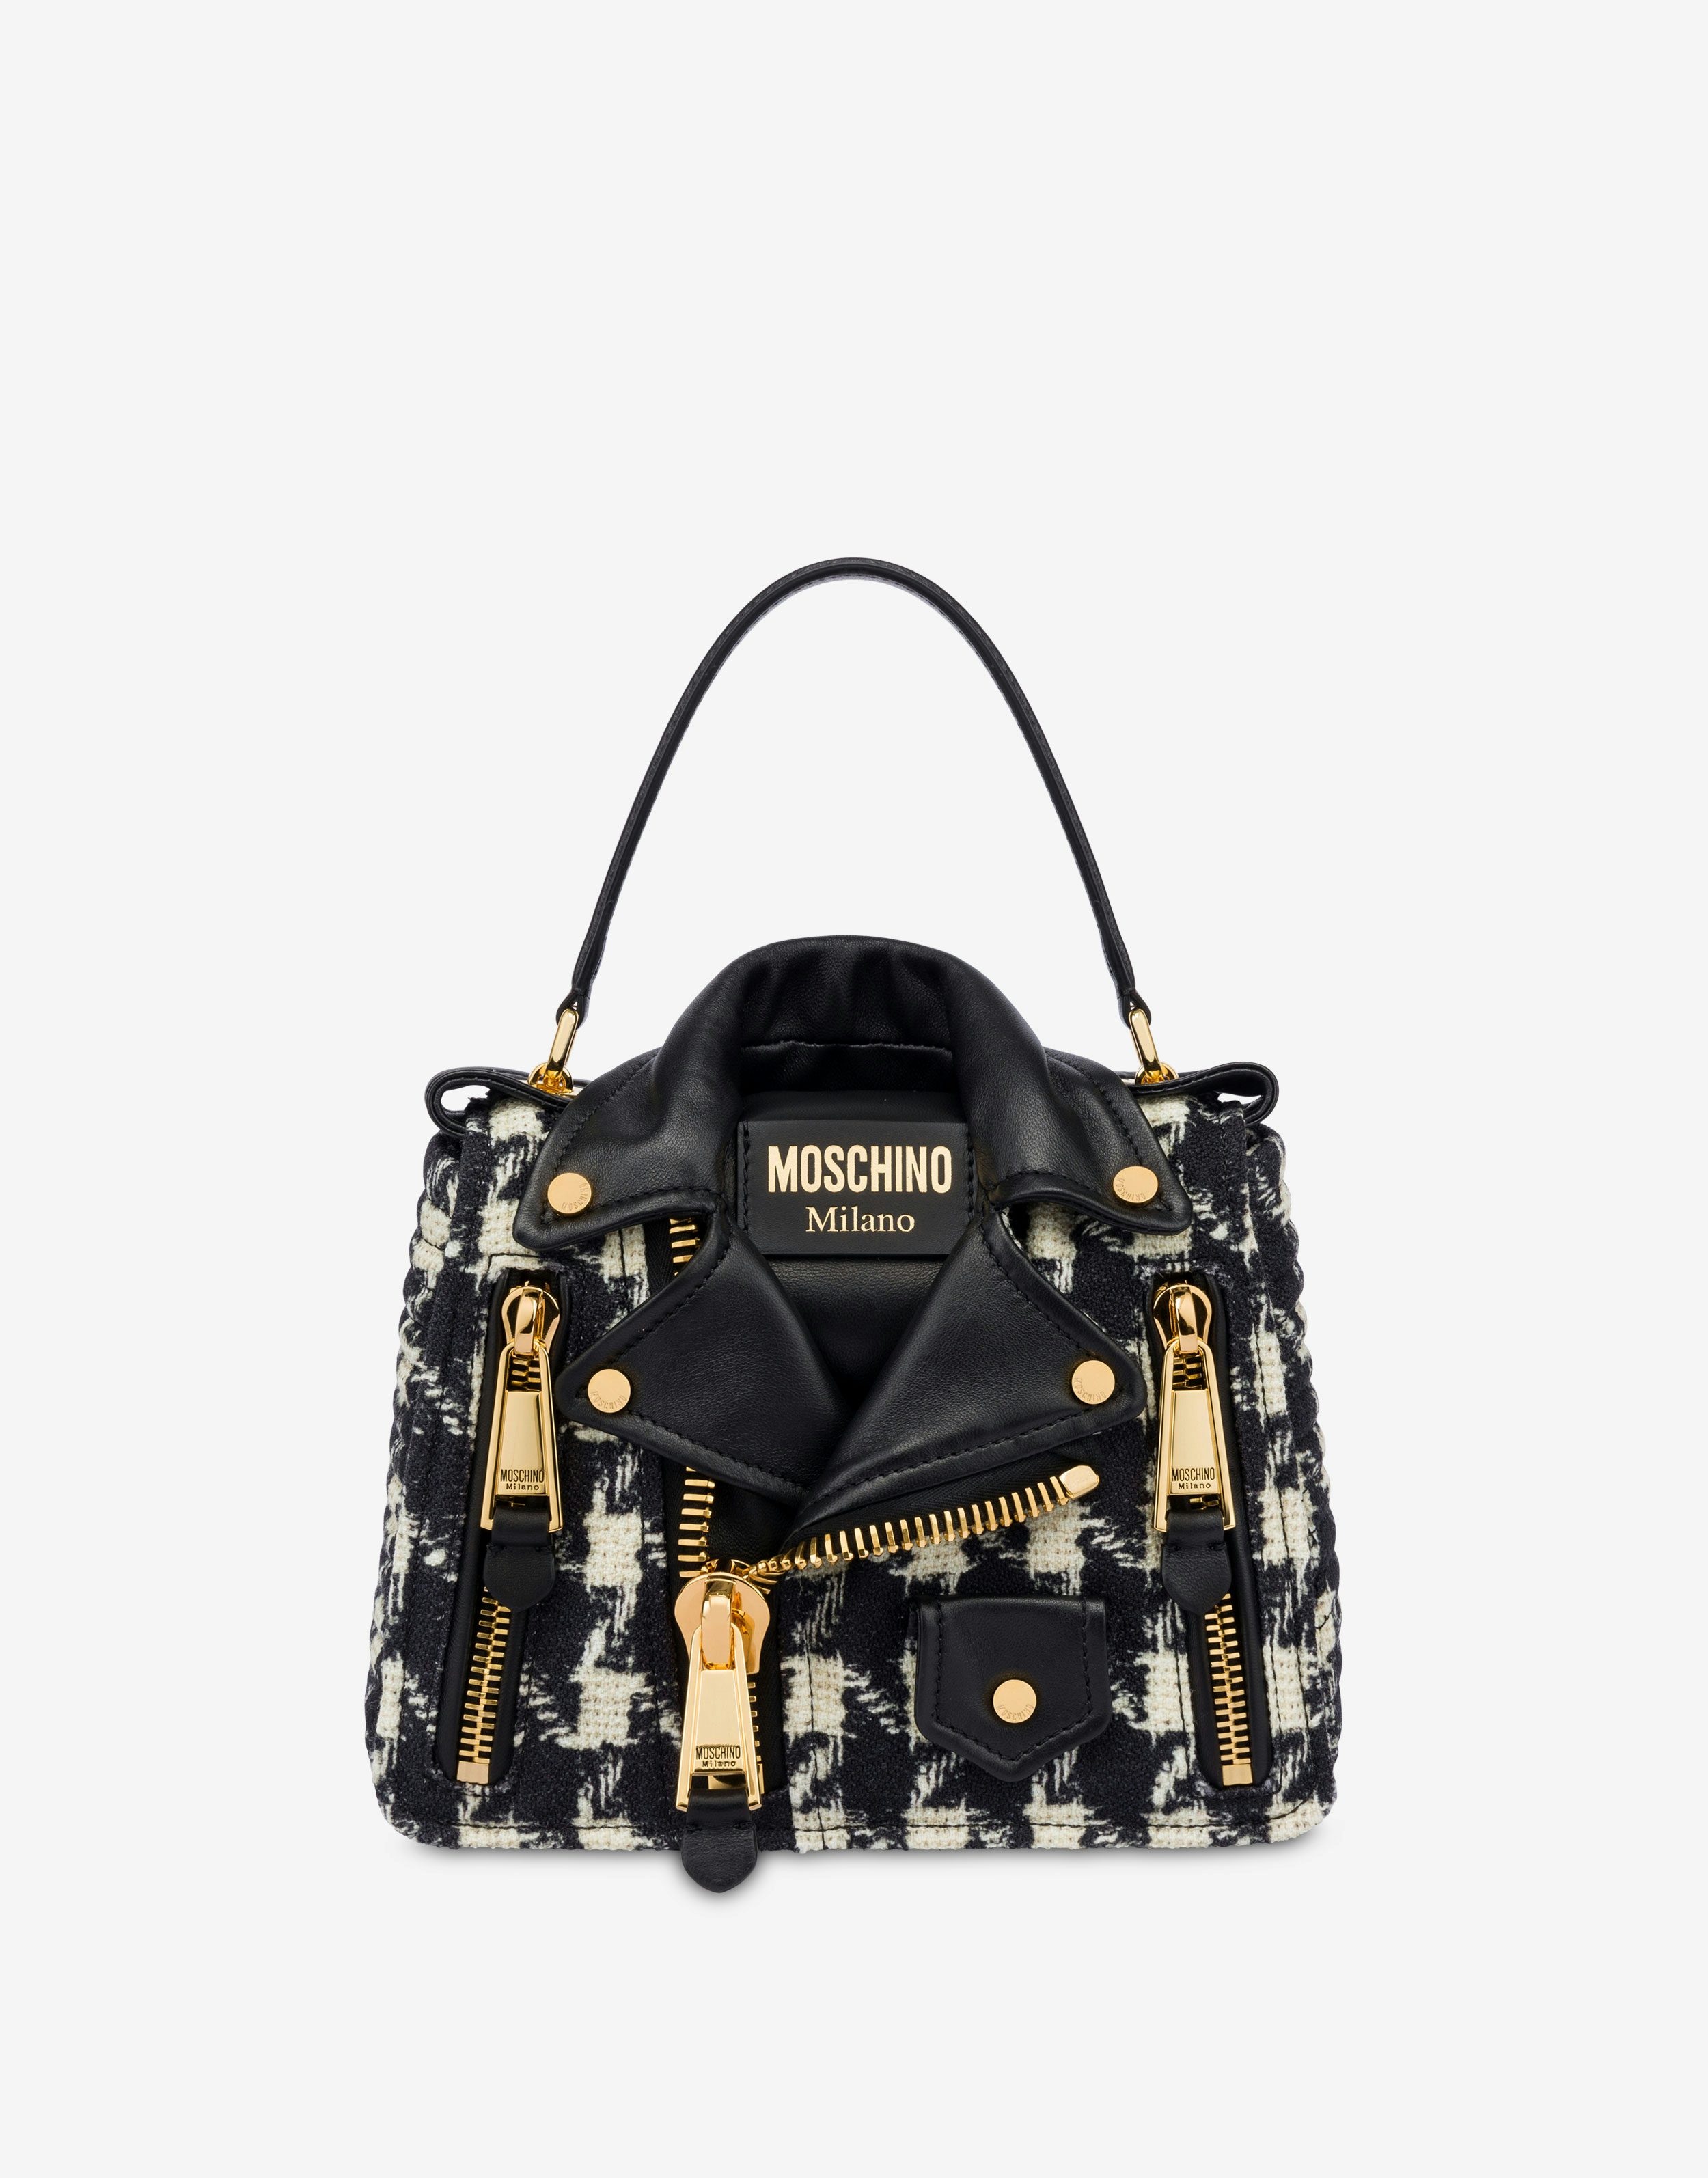 MOSCHINO OUTLET | Moschino Mini Leather Bag im SALE | ARCHIVIST